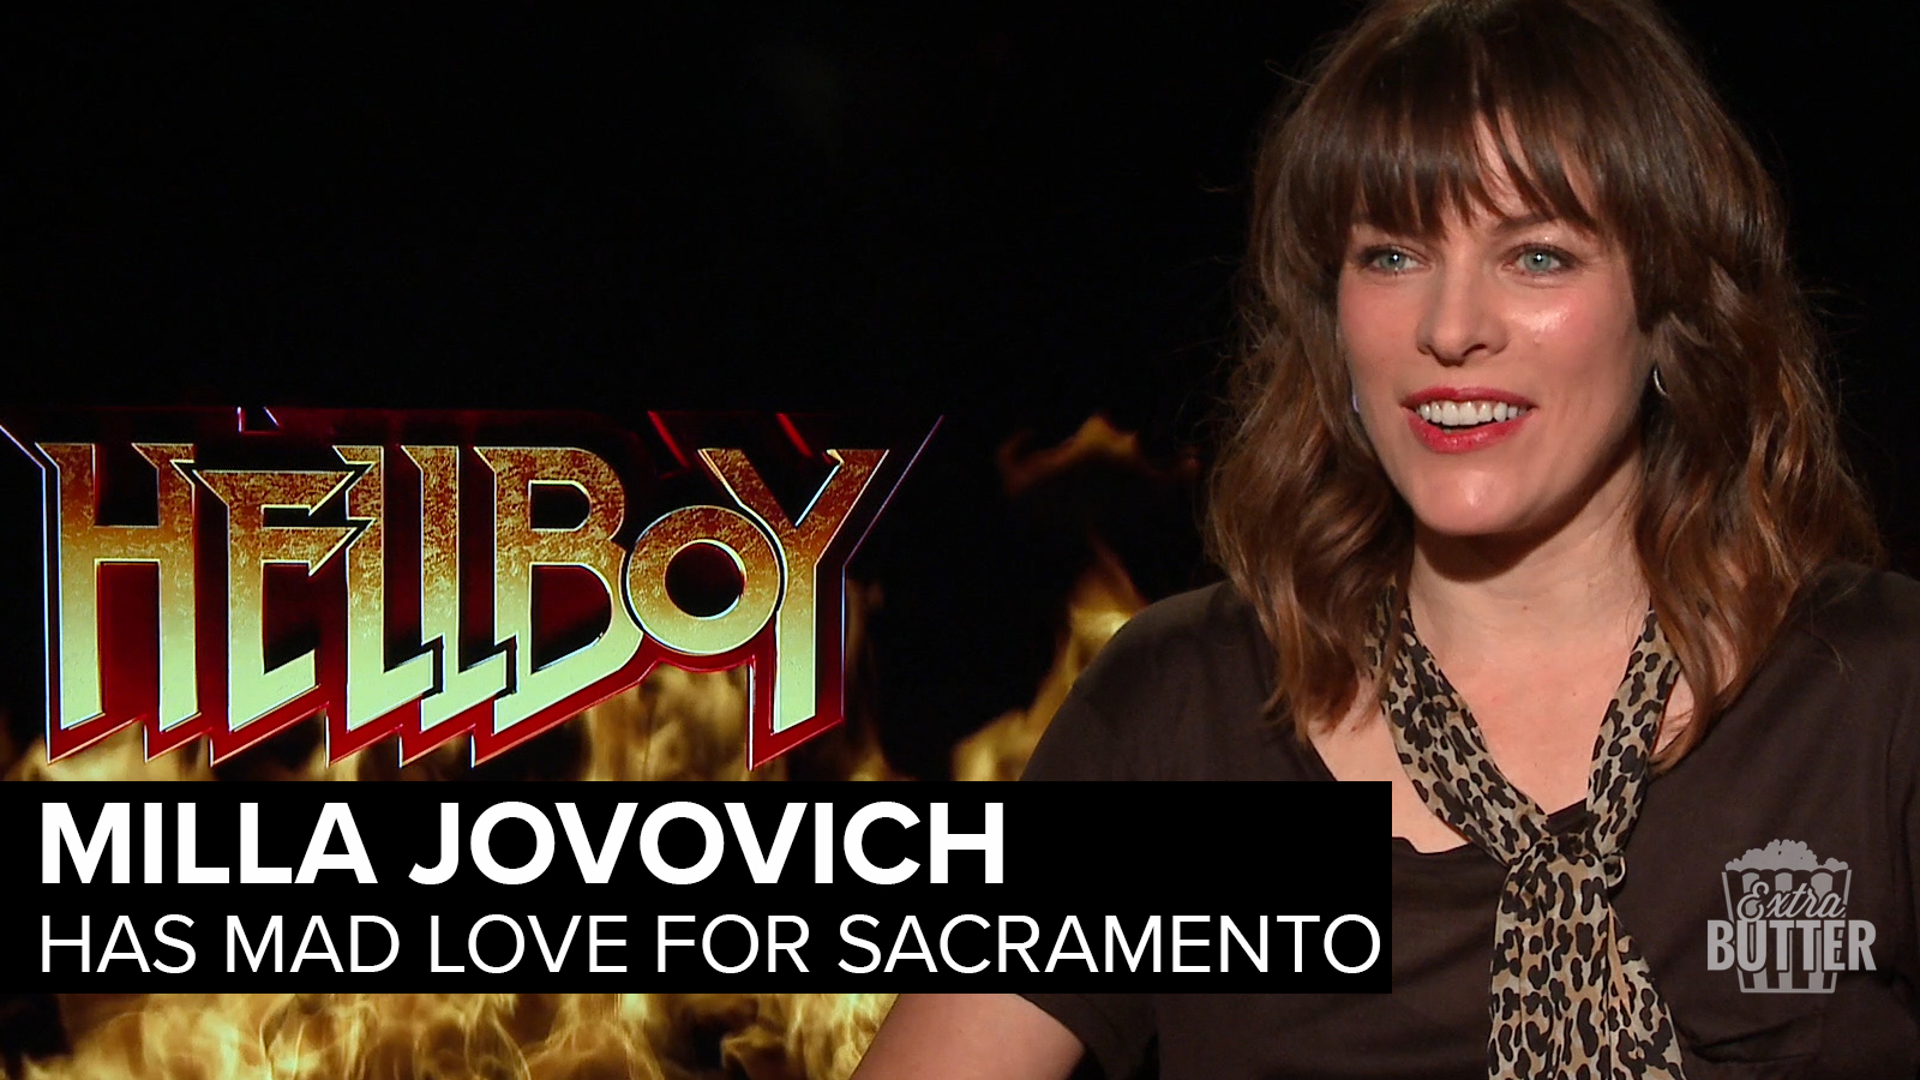 Milla Jovovich talks about the new movie 'Hellboy' and her long history of playing strong women on the big screen. She also takes time to thank the women who kicked butt before her. Milla also tells Mark S. Allen about why she loved growing up in Sacramento, California. Interview arranged by Summit Entertainment.